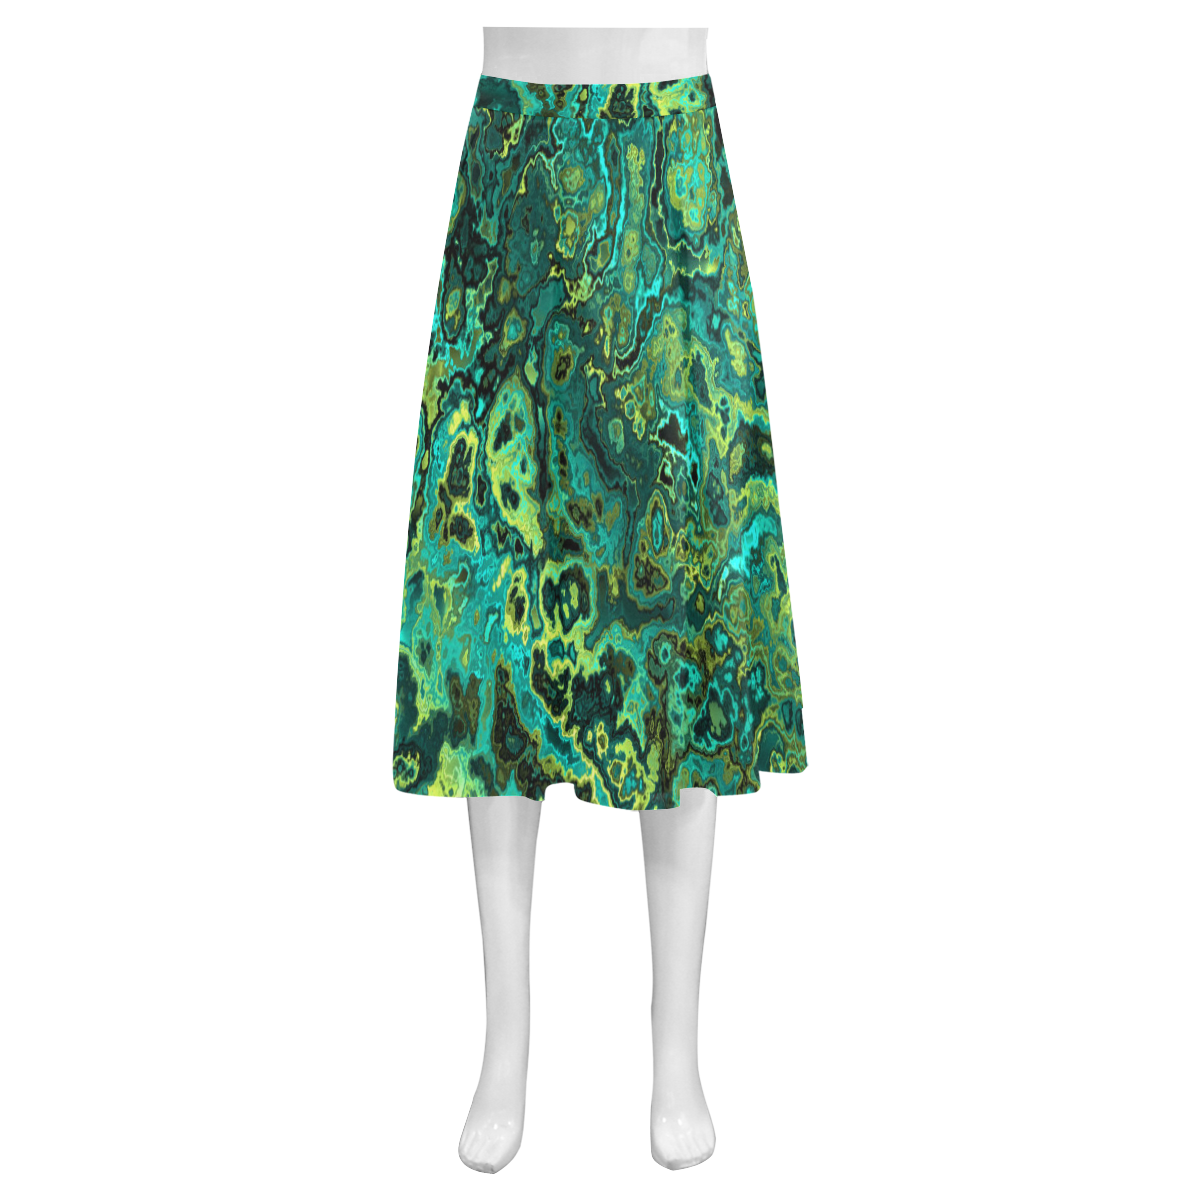 greens abstract Mnemosyne Women's Crepe Skirt (Model D16)